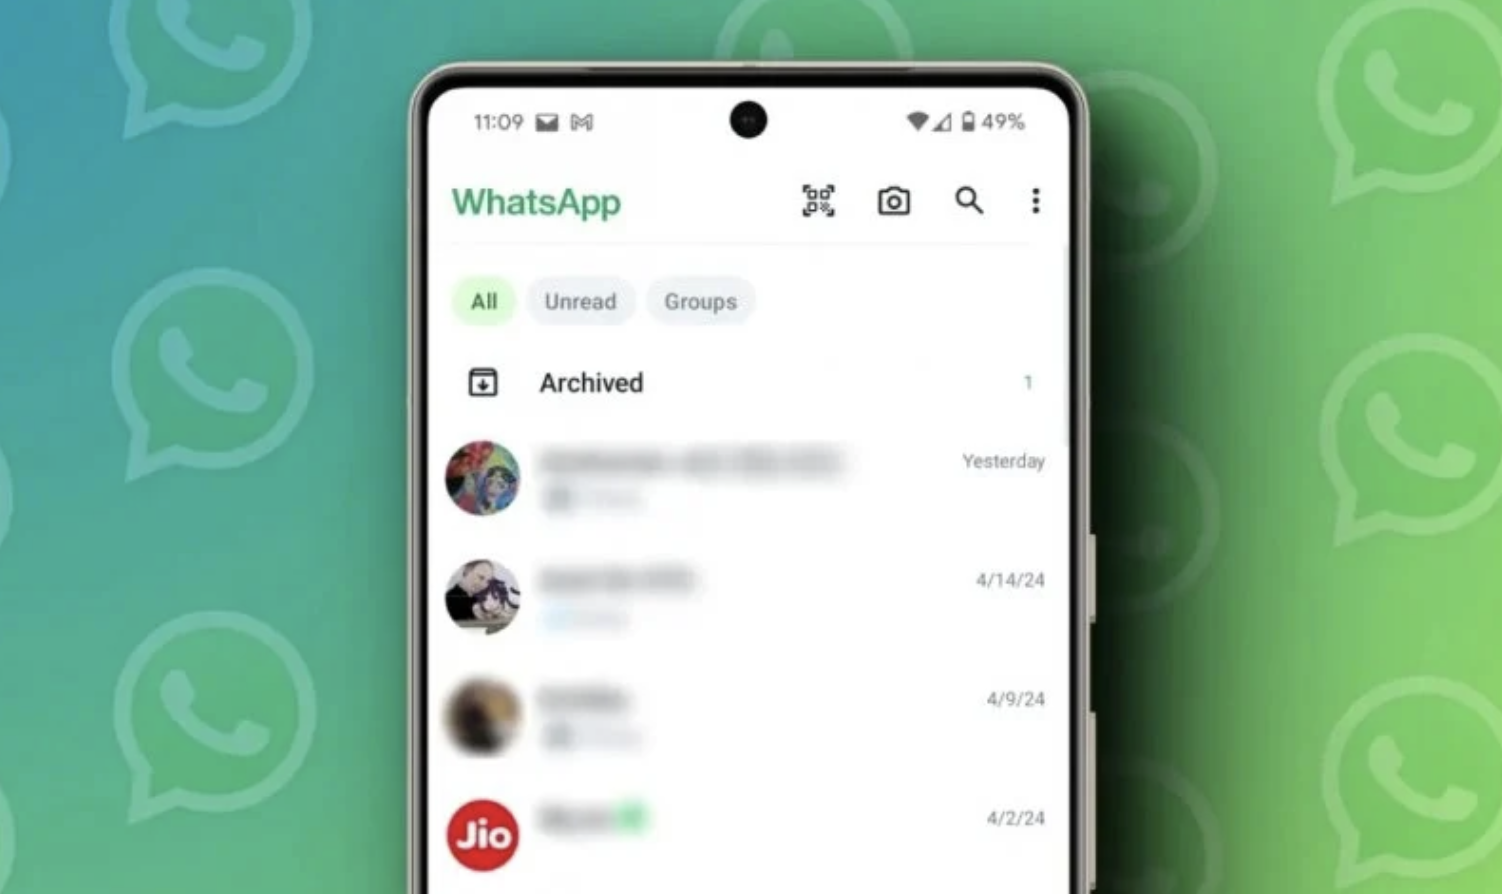 WhatsApp Enhances User Interface with Chat Filters for Better Conversation Management